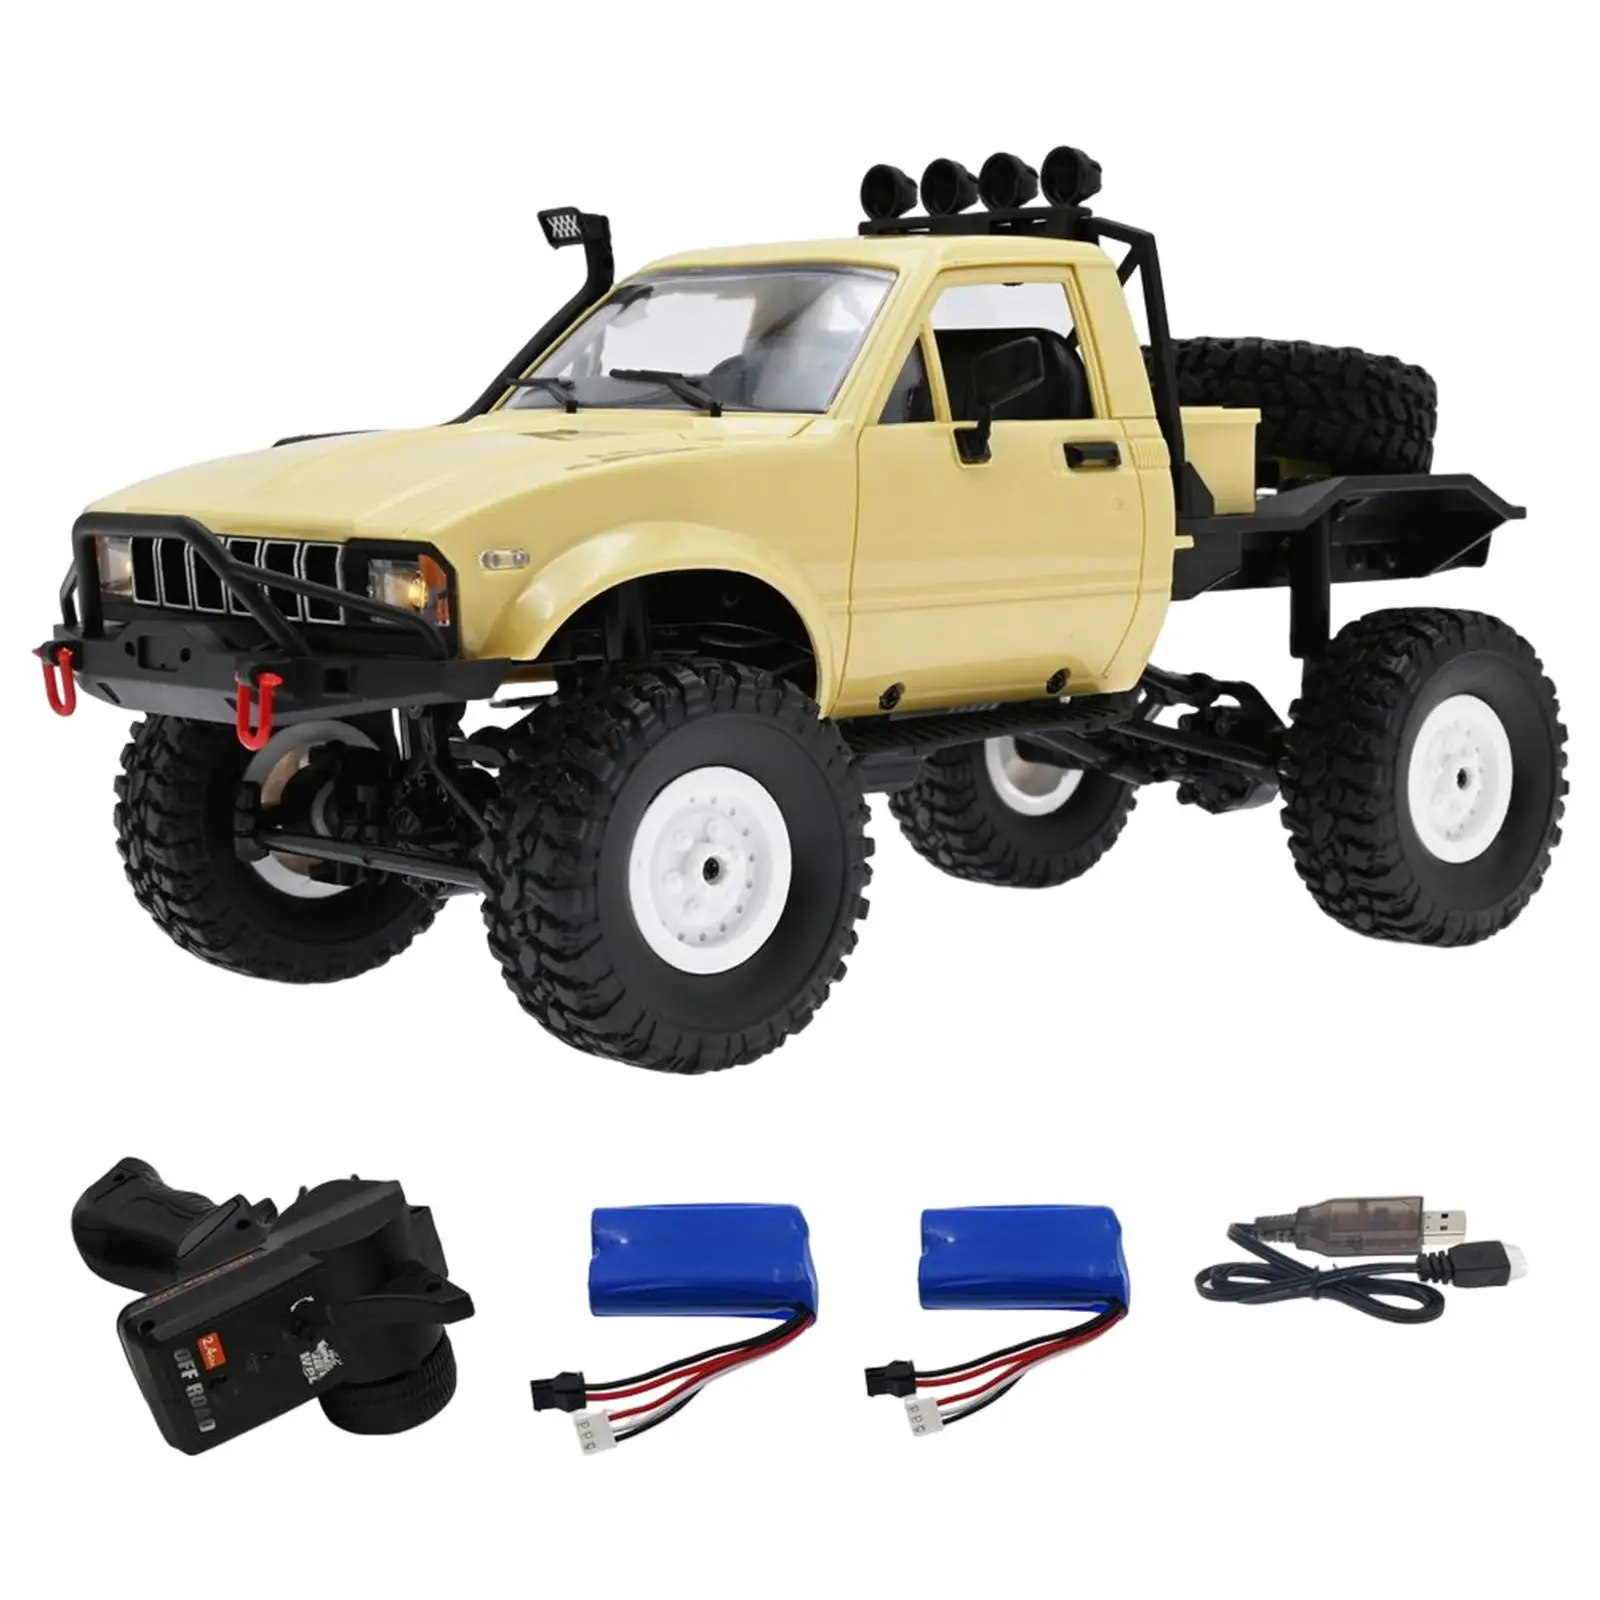 1/16 Scale RC Truck C14 Rock Crawler 4WD 4CH for WPL Racing Vehicle